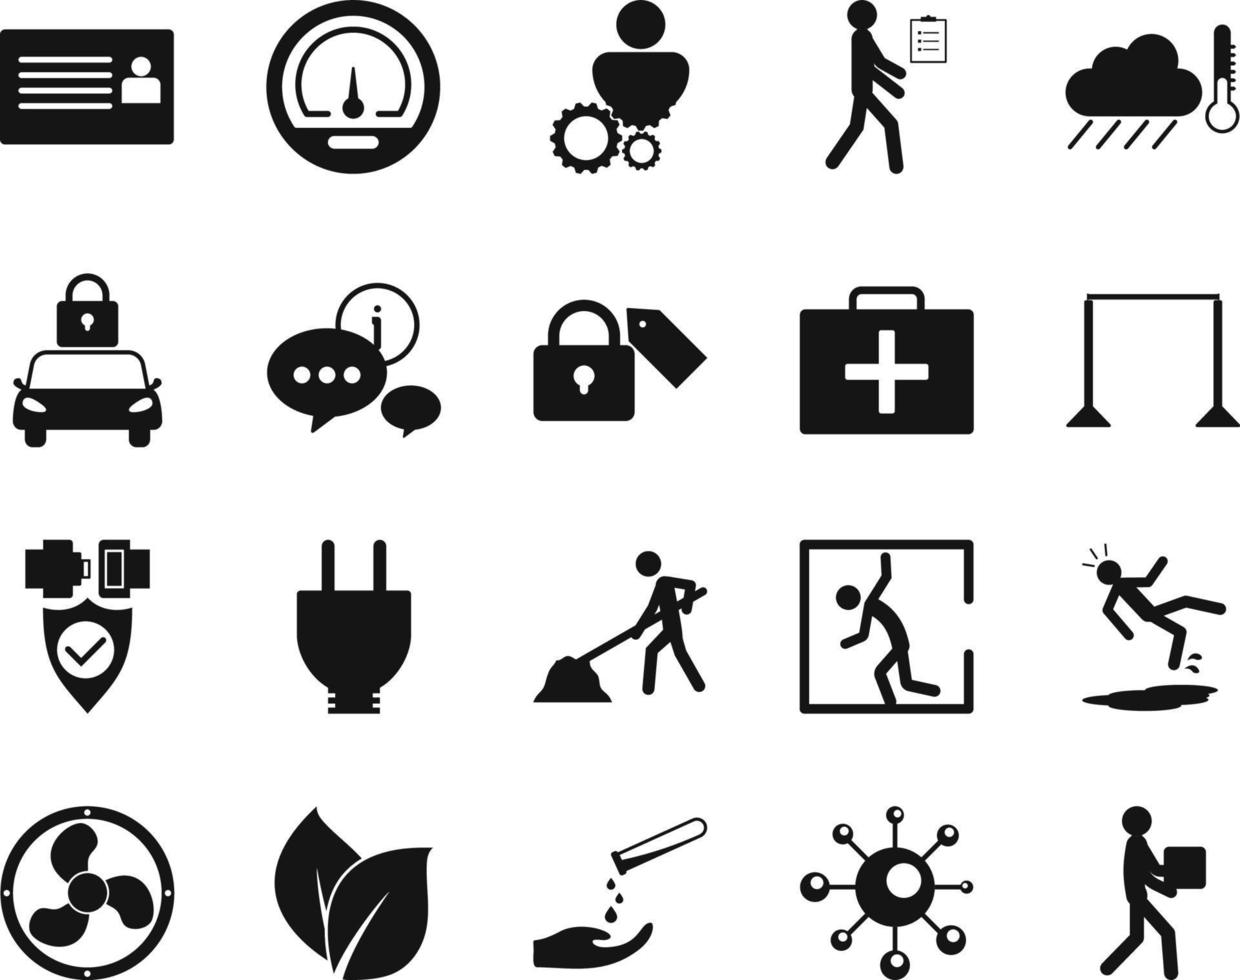 HSE concept, occupational safety and health Human, move box, production factory and environment, labor preventive instructions, worker protection vector icon set on white background